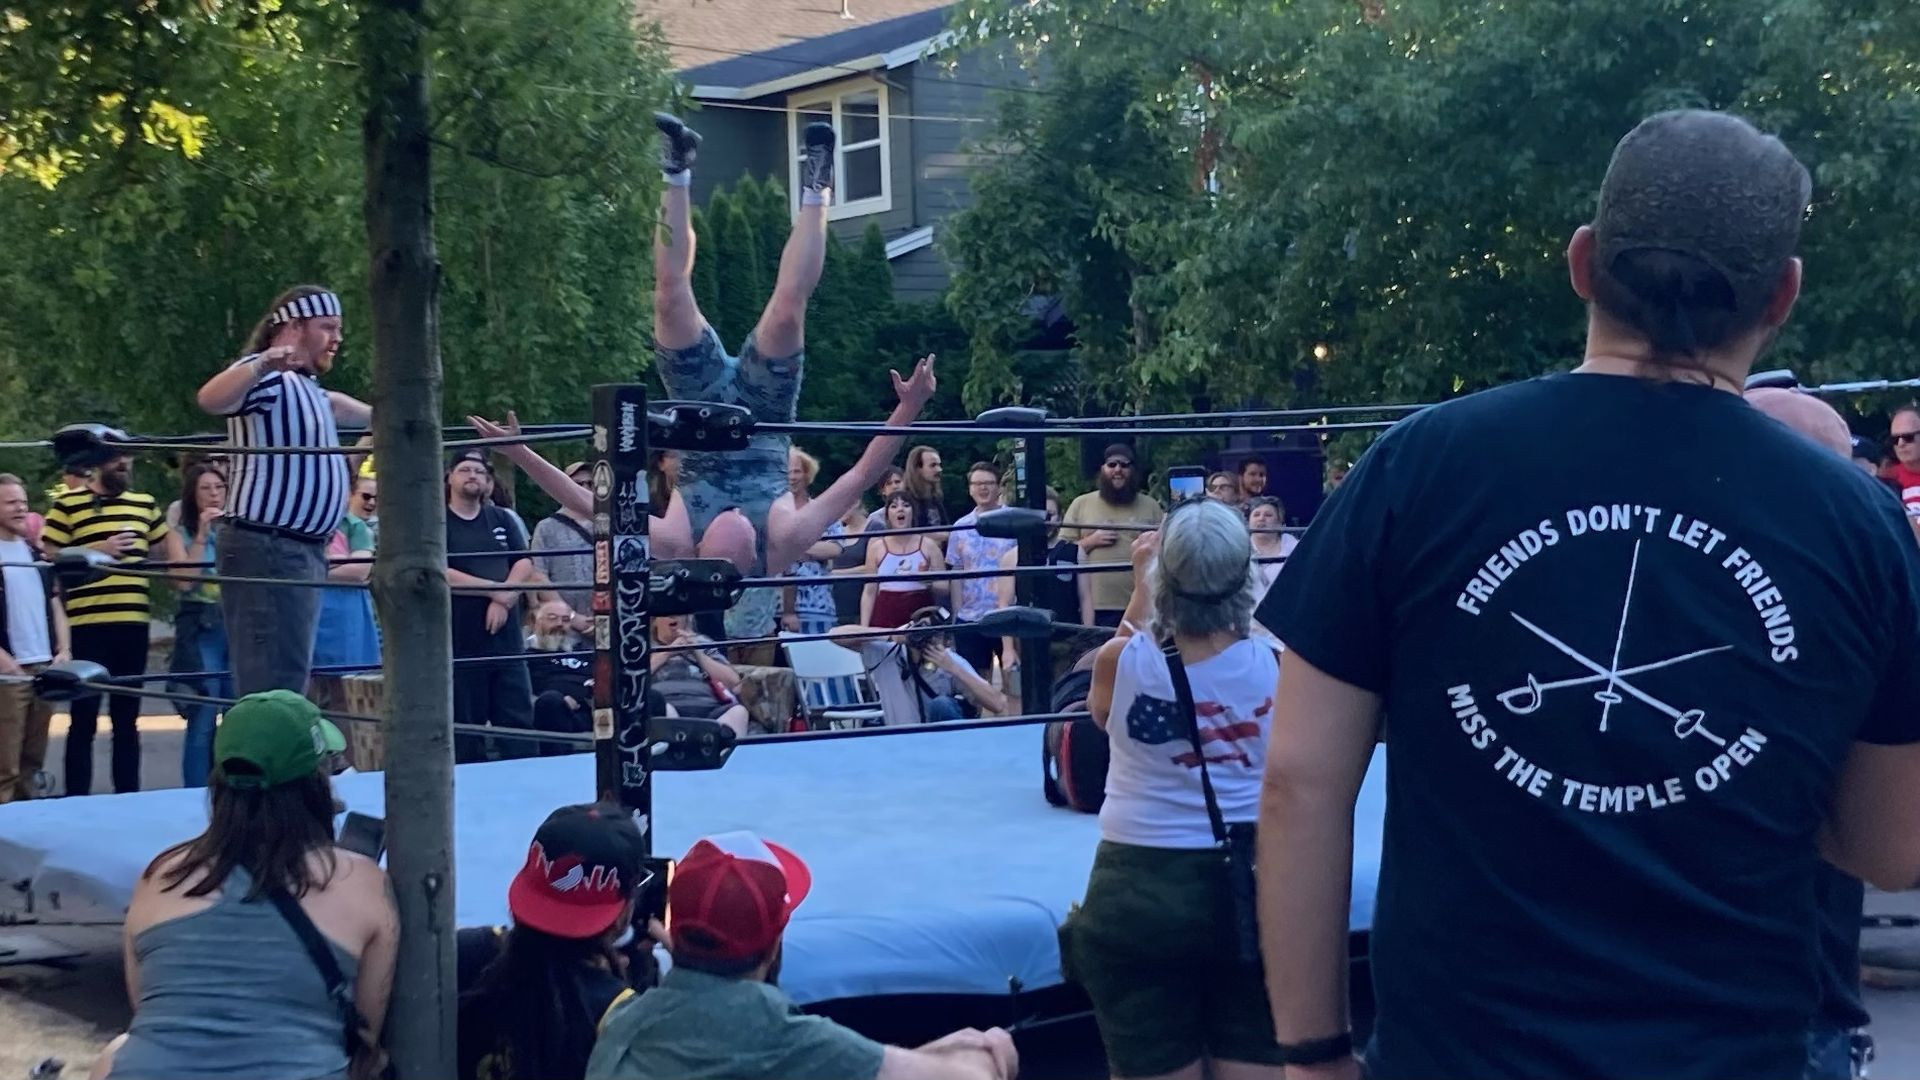 A man is upside down in the air, feet above his head, while a man in a black and white referee shirt looks on in a traveling wrestling ring set up with street onlookers.